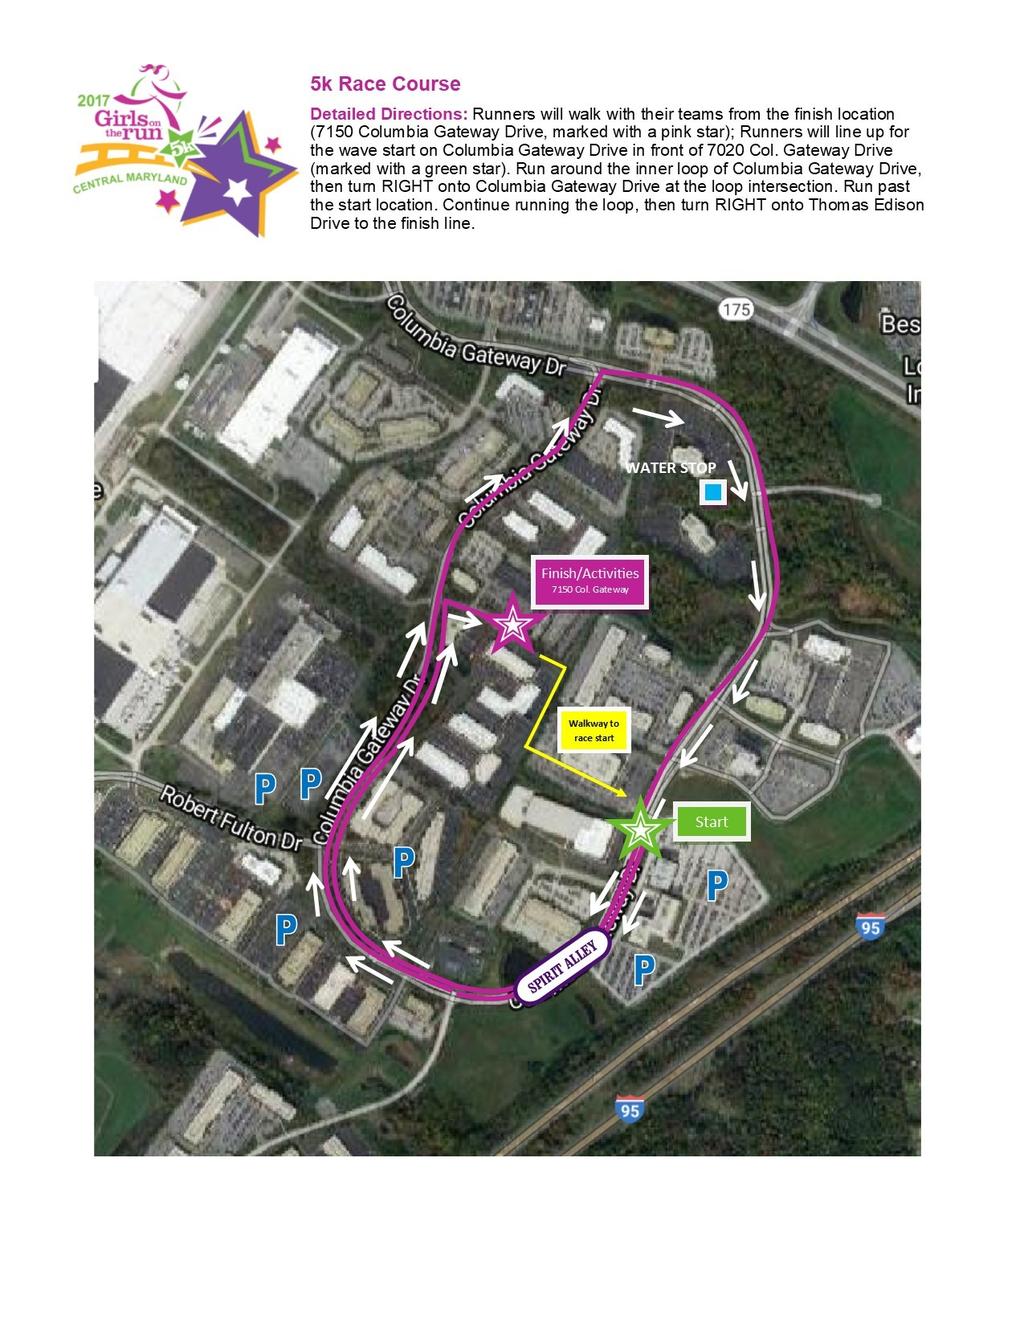 The Race Course 5k Facts WATER STOP #1 GOTR Merchandise will be available for sale in Celebration Village before, during, and immediately after the 5k. Finish/Activities 7150 Col.